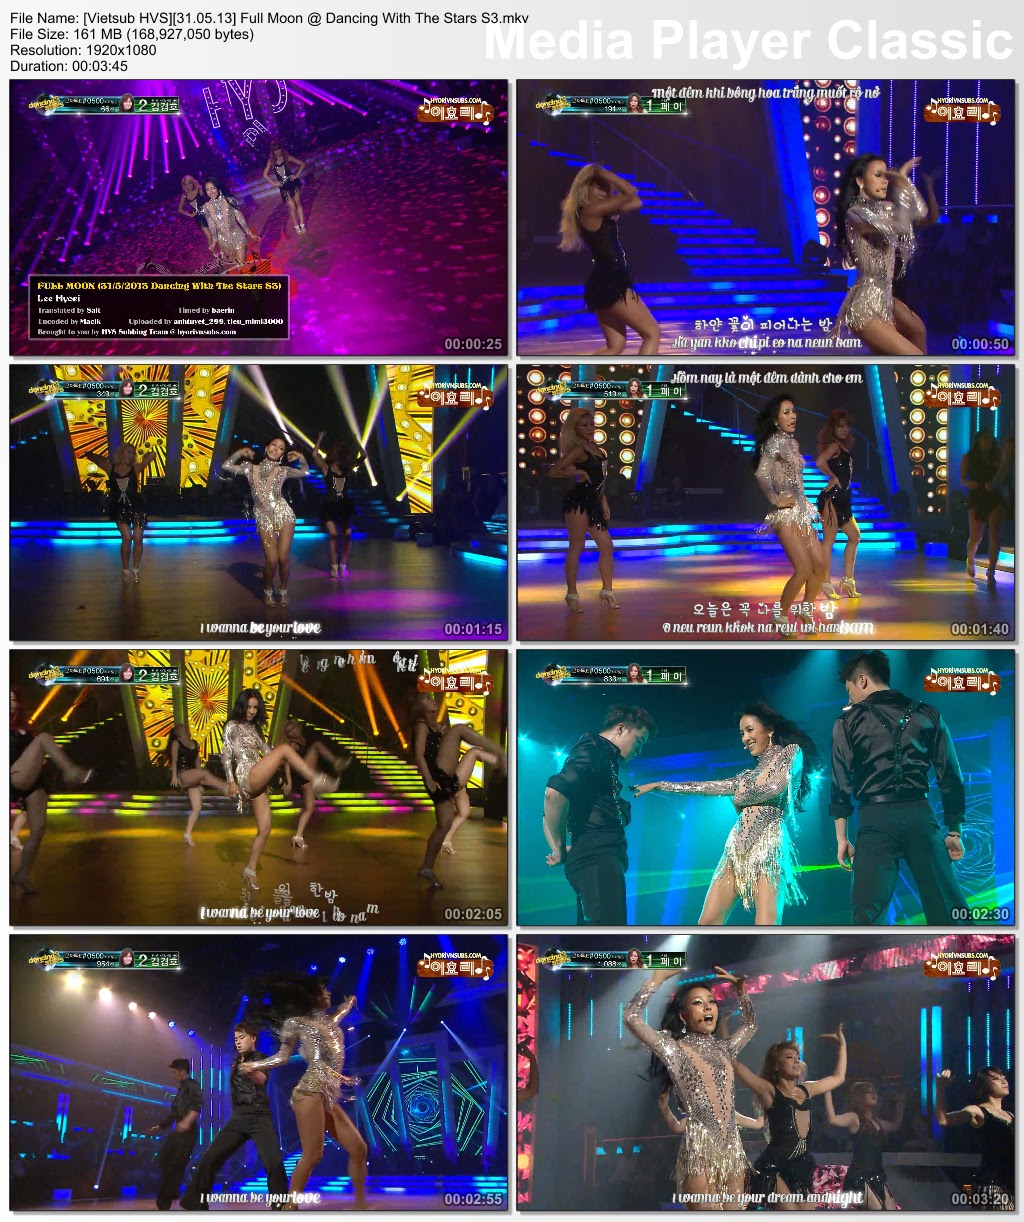 [Vietsub][31.05.13] Full Moon @ Dancing With The Stars S3 %255BVietsub+HVS%255D%255B31.05.13%255D+Full+Moon+%2540+Dancing+With+The+Stars+S3